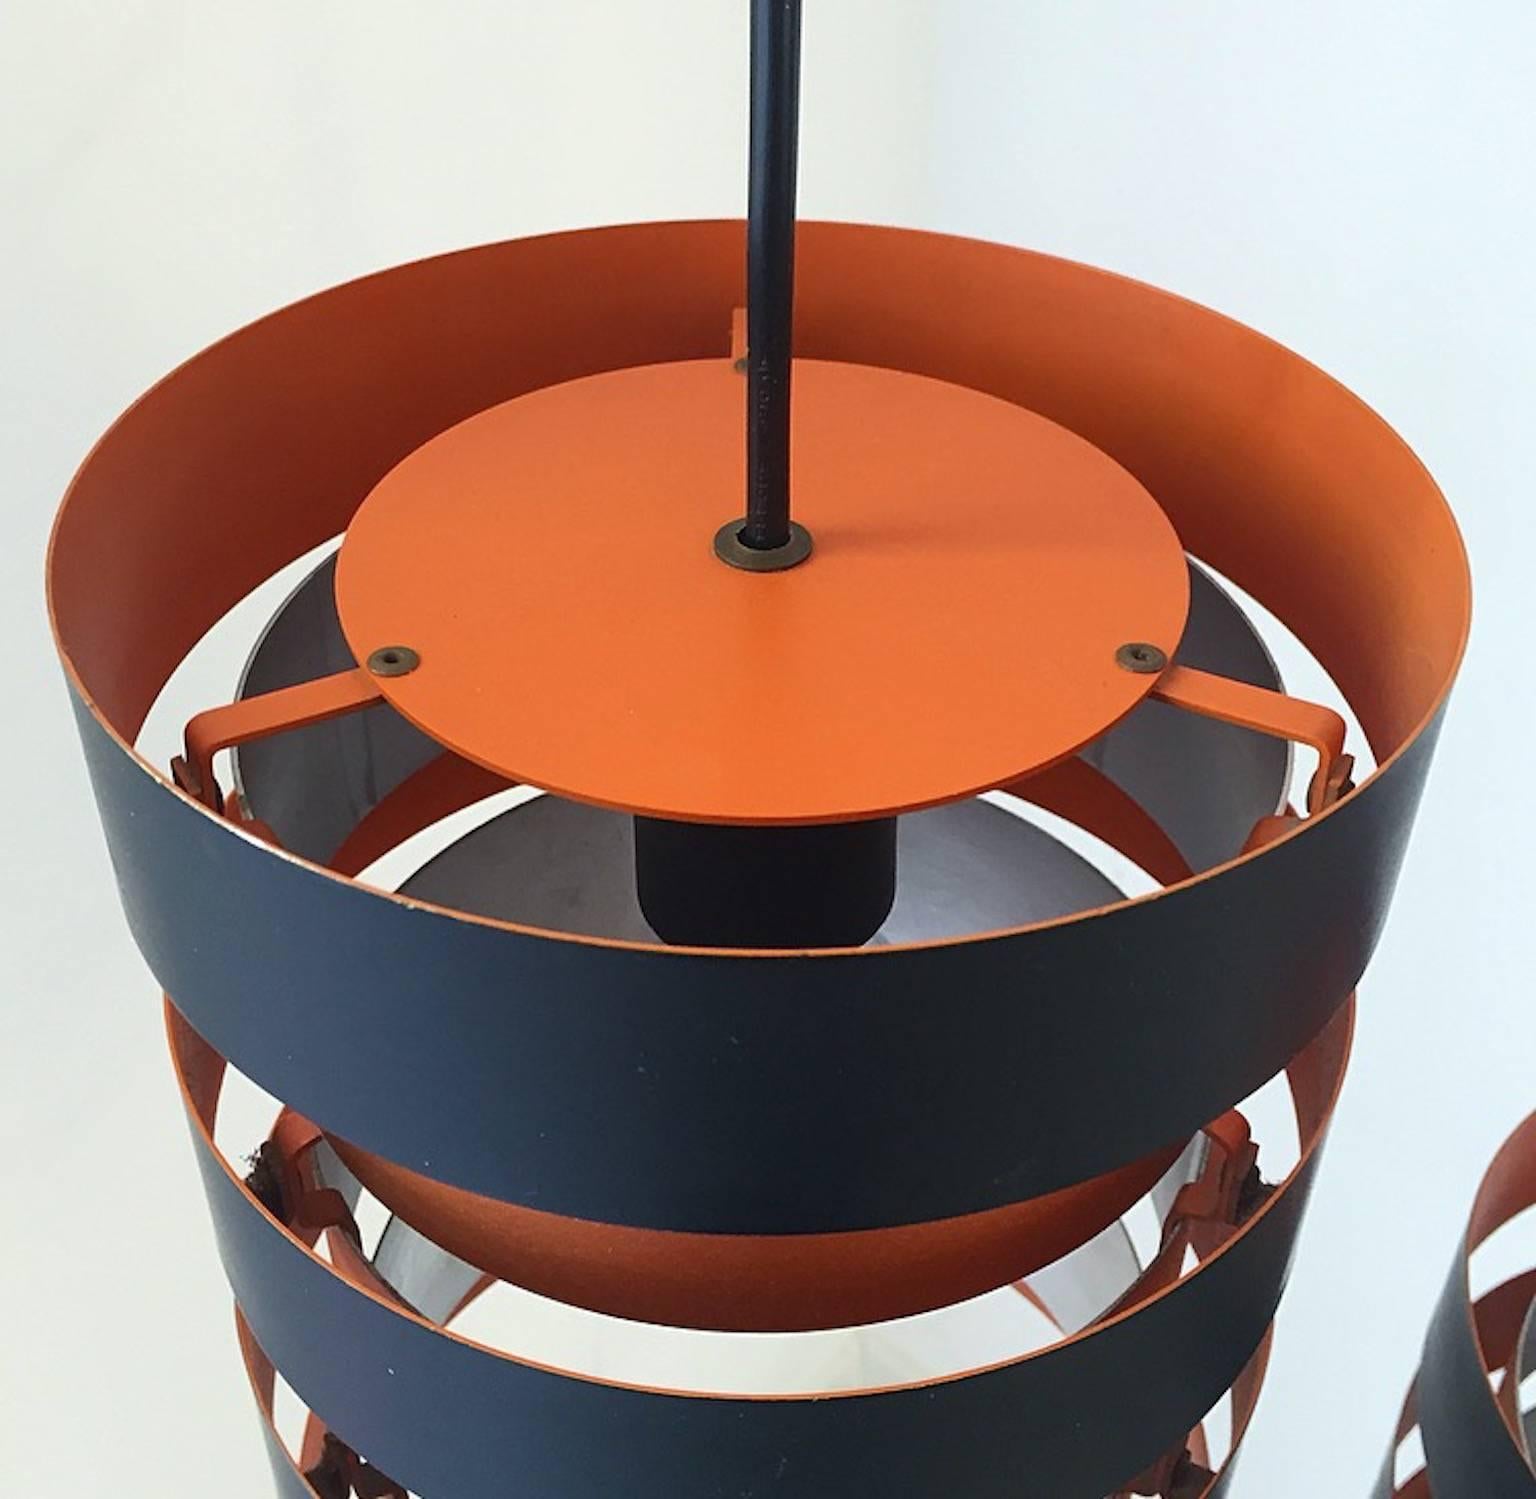 Lacquered Danish Mid-Century Copper Ceiling Light from Fog and Morup, Denmark